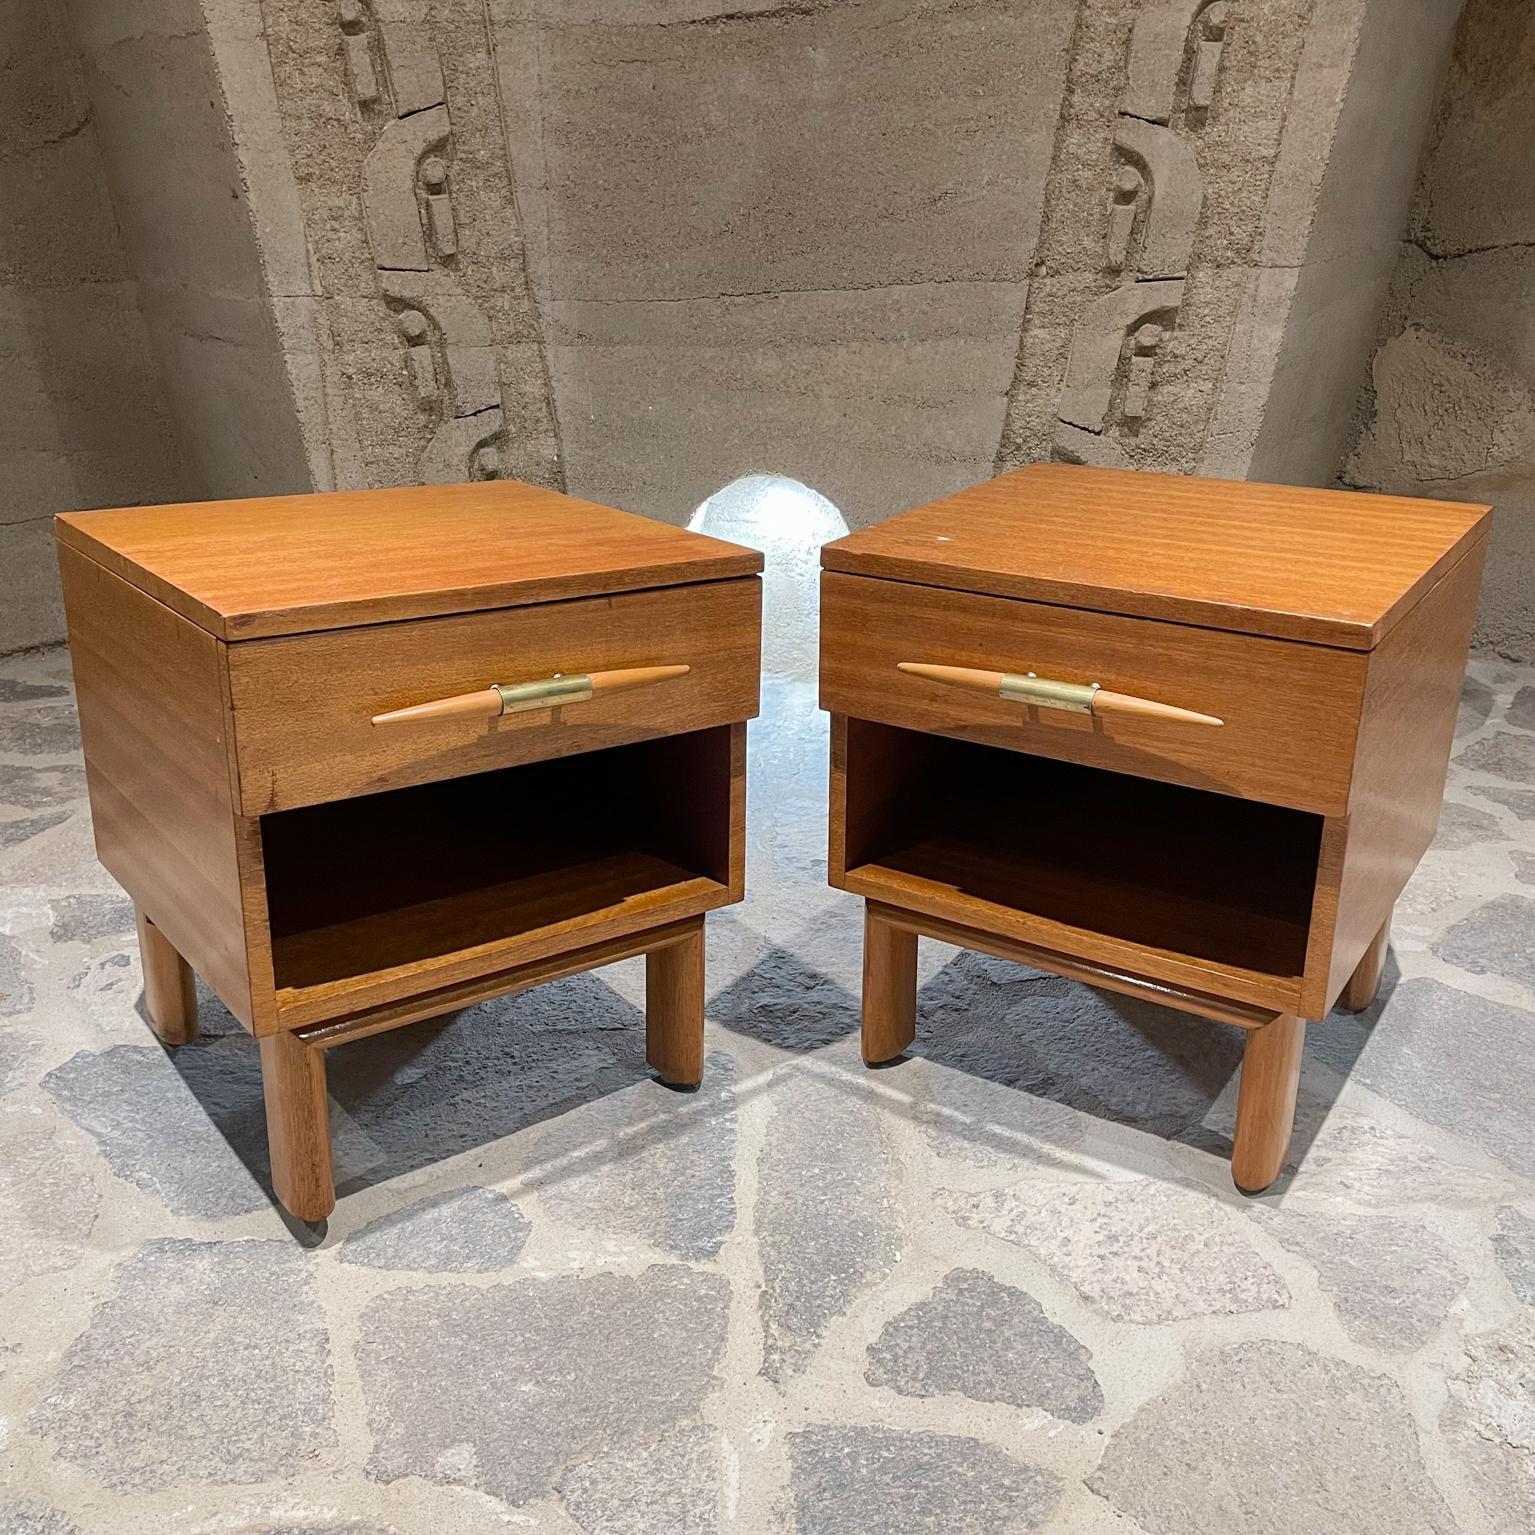 Nightstands
Brown Saltman blonde mahogany modern nightstands 1950s USA
Exceptionally clean modern lines designed by John Keal
Maker label present.
Shows sculptural thick oval legs and large spindle pulls with brass. 
Spacious drawer and